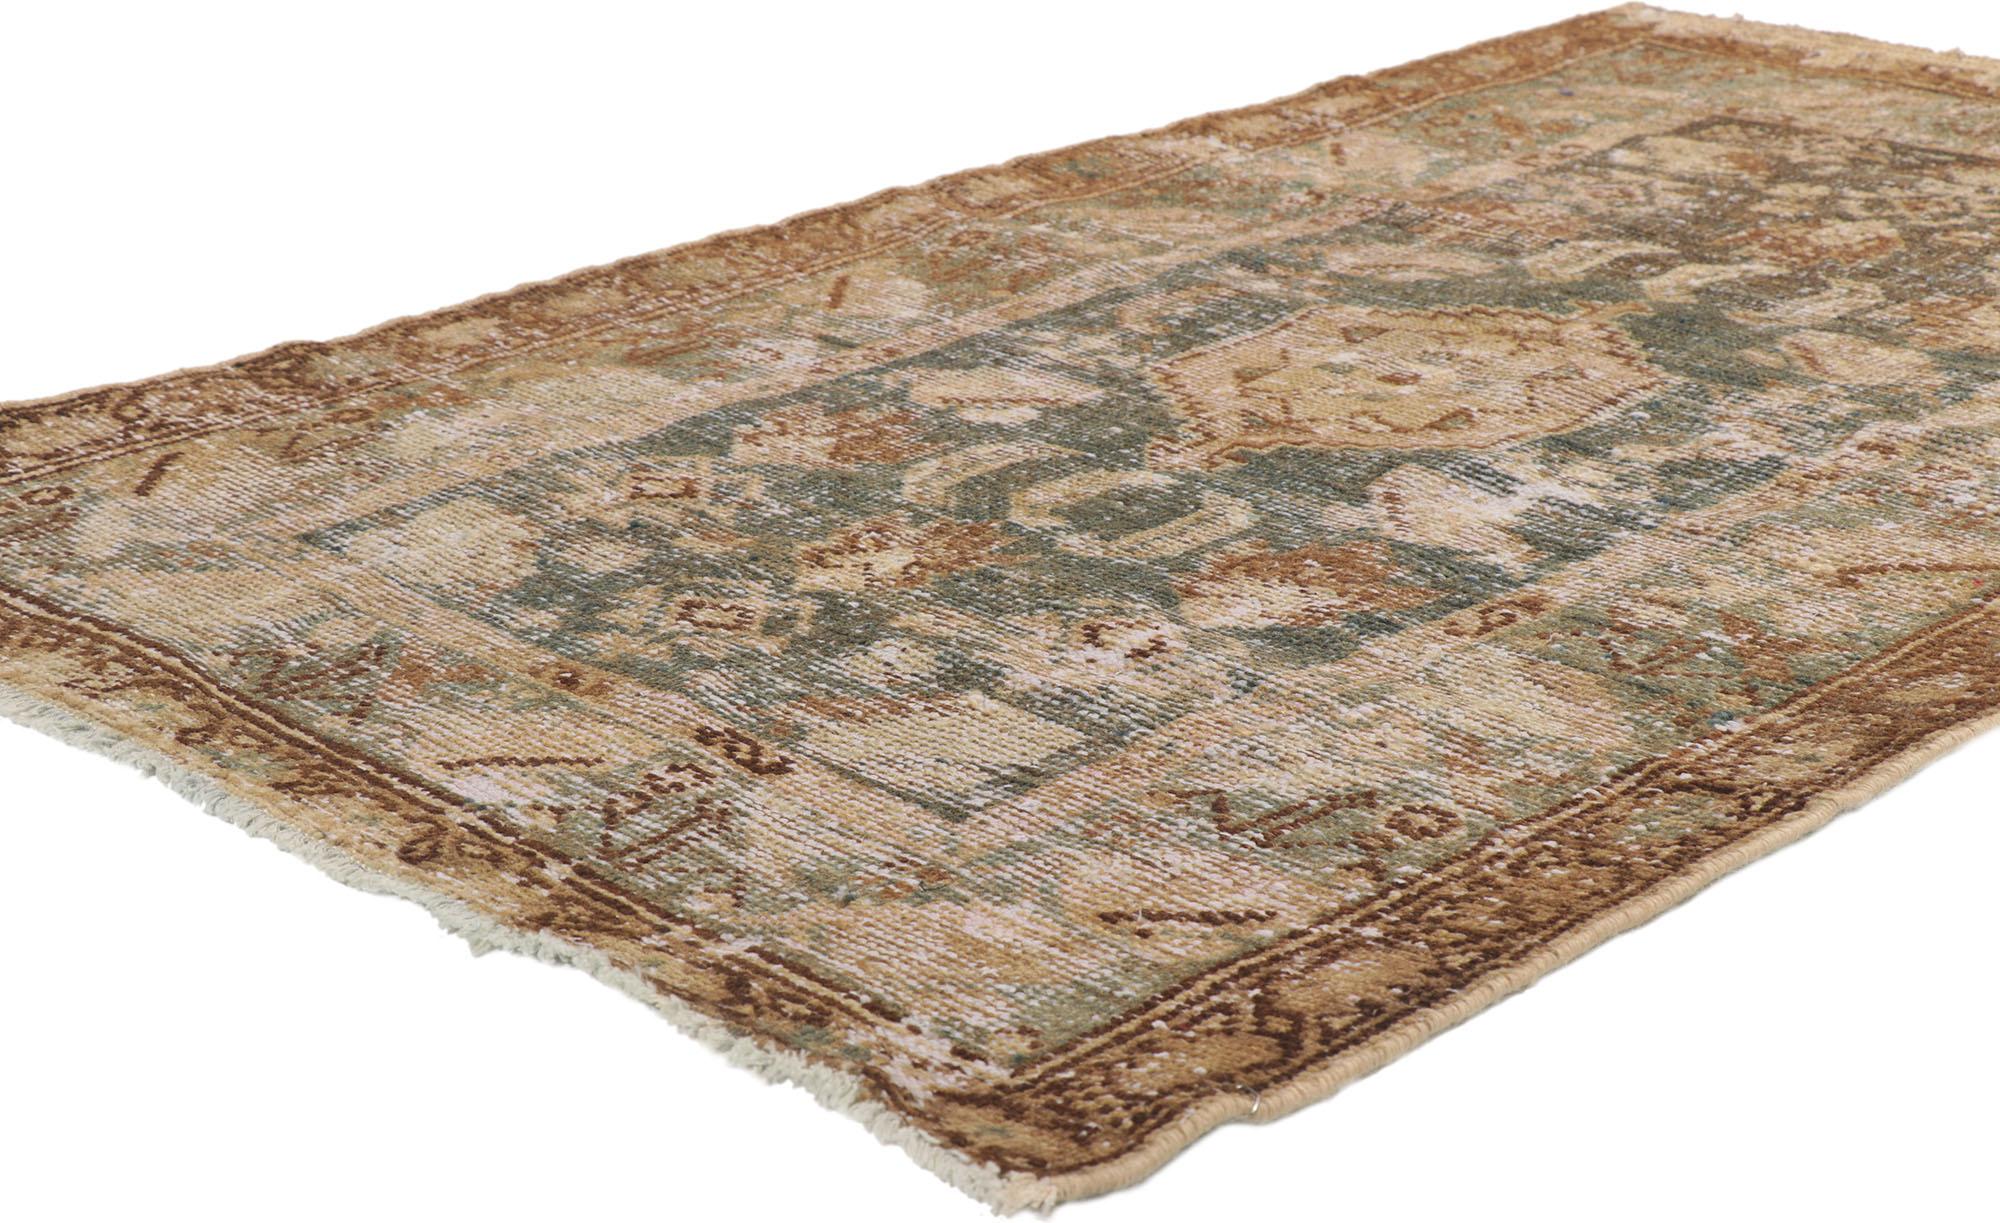 53762 Distressed Antique Persian Malayer rug 03'04 x 05'05
Emanating sophistication with rustic sensibility, this hand knotted wool distressed antique Persian Malayer rug beautifully embodies a modern Industrial style. The lovingly time-worn